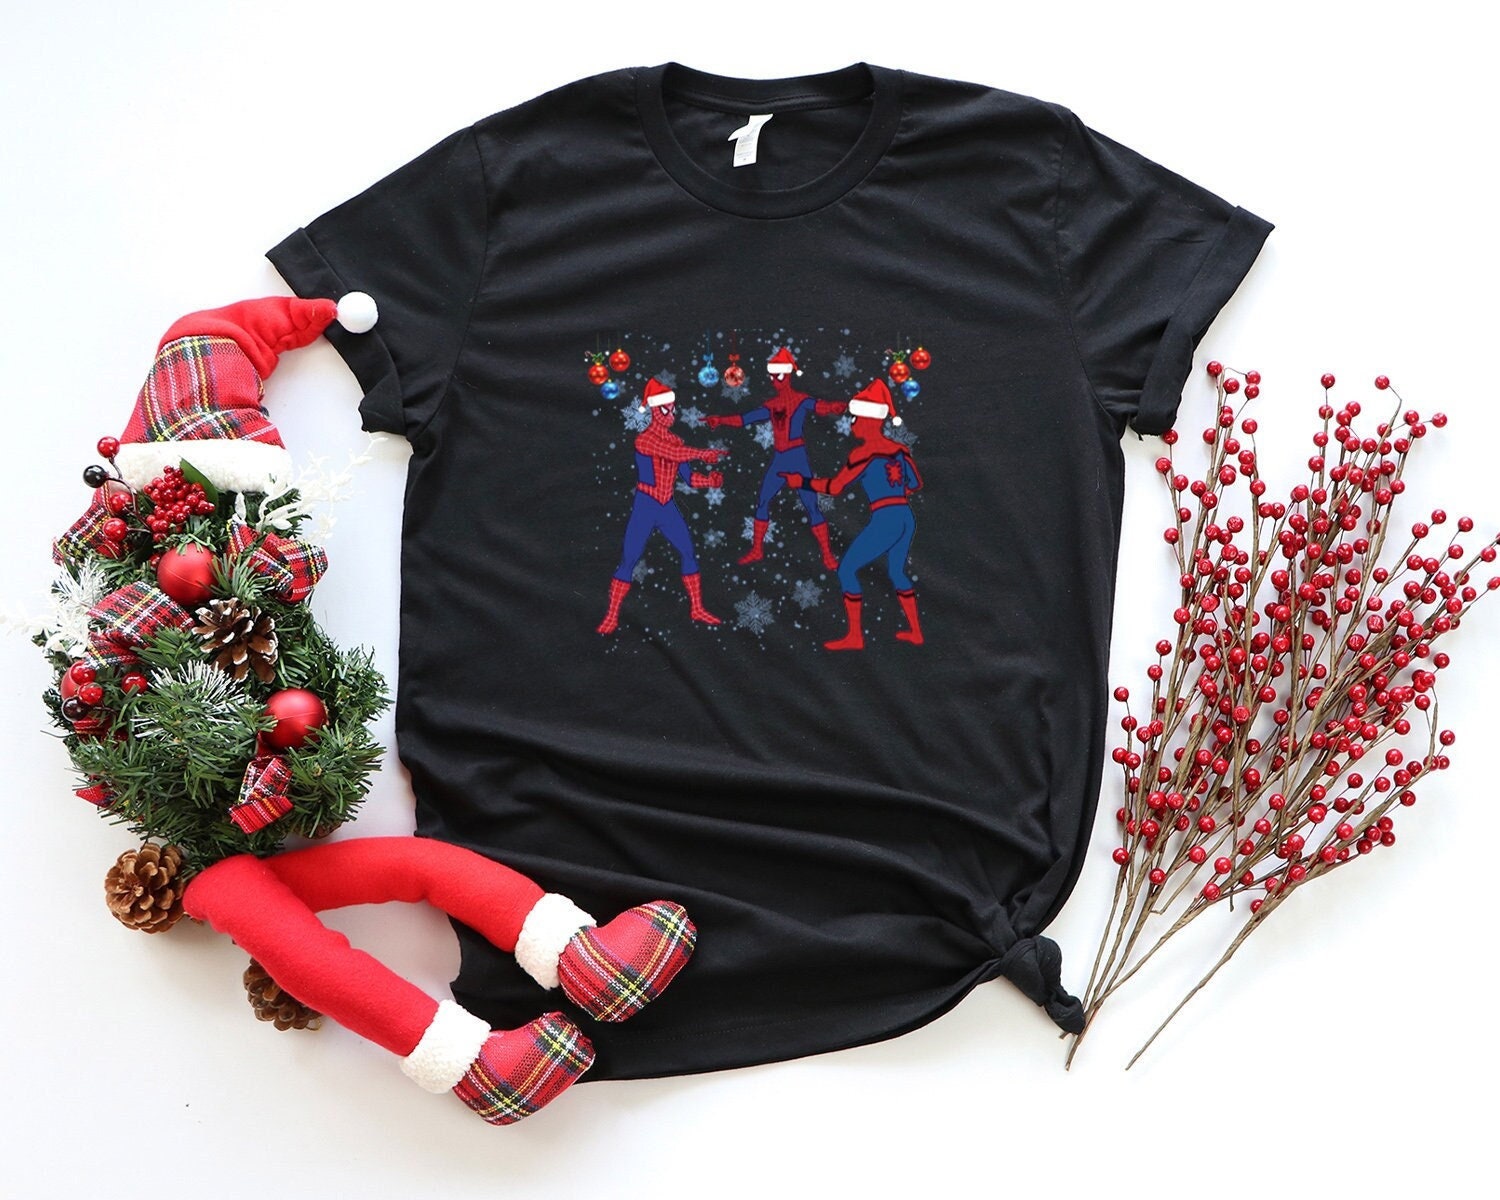 Discover Spiderman Christmas shirt, Multiverse Spiderman T-Shirt, 3 Spiderman Mem